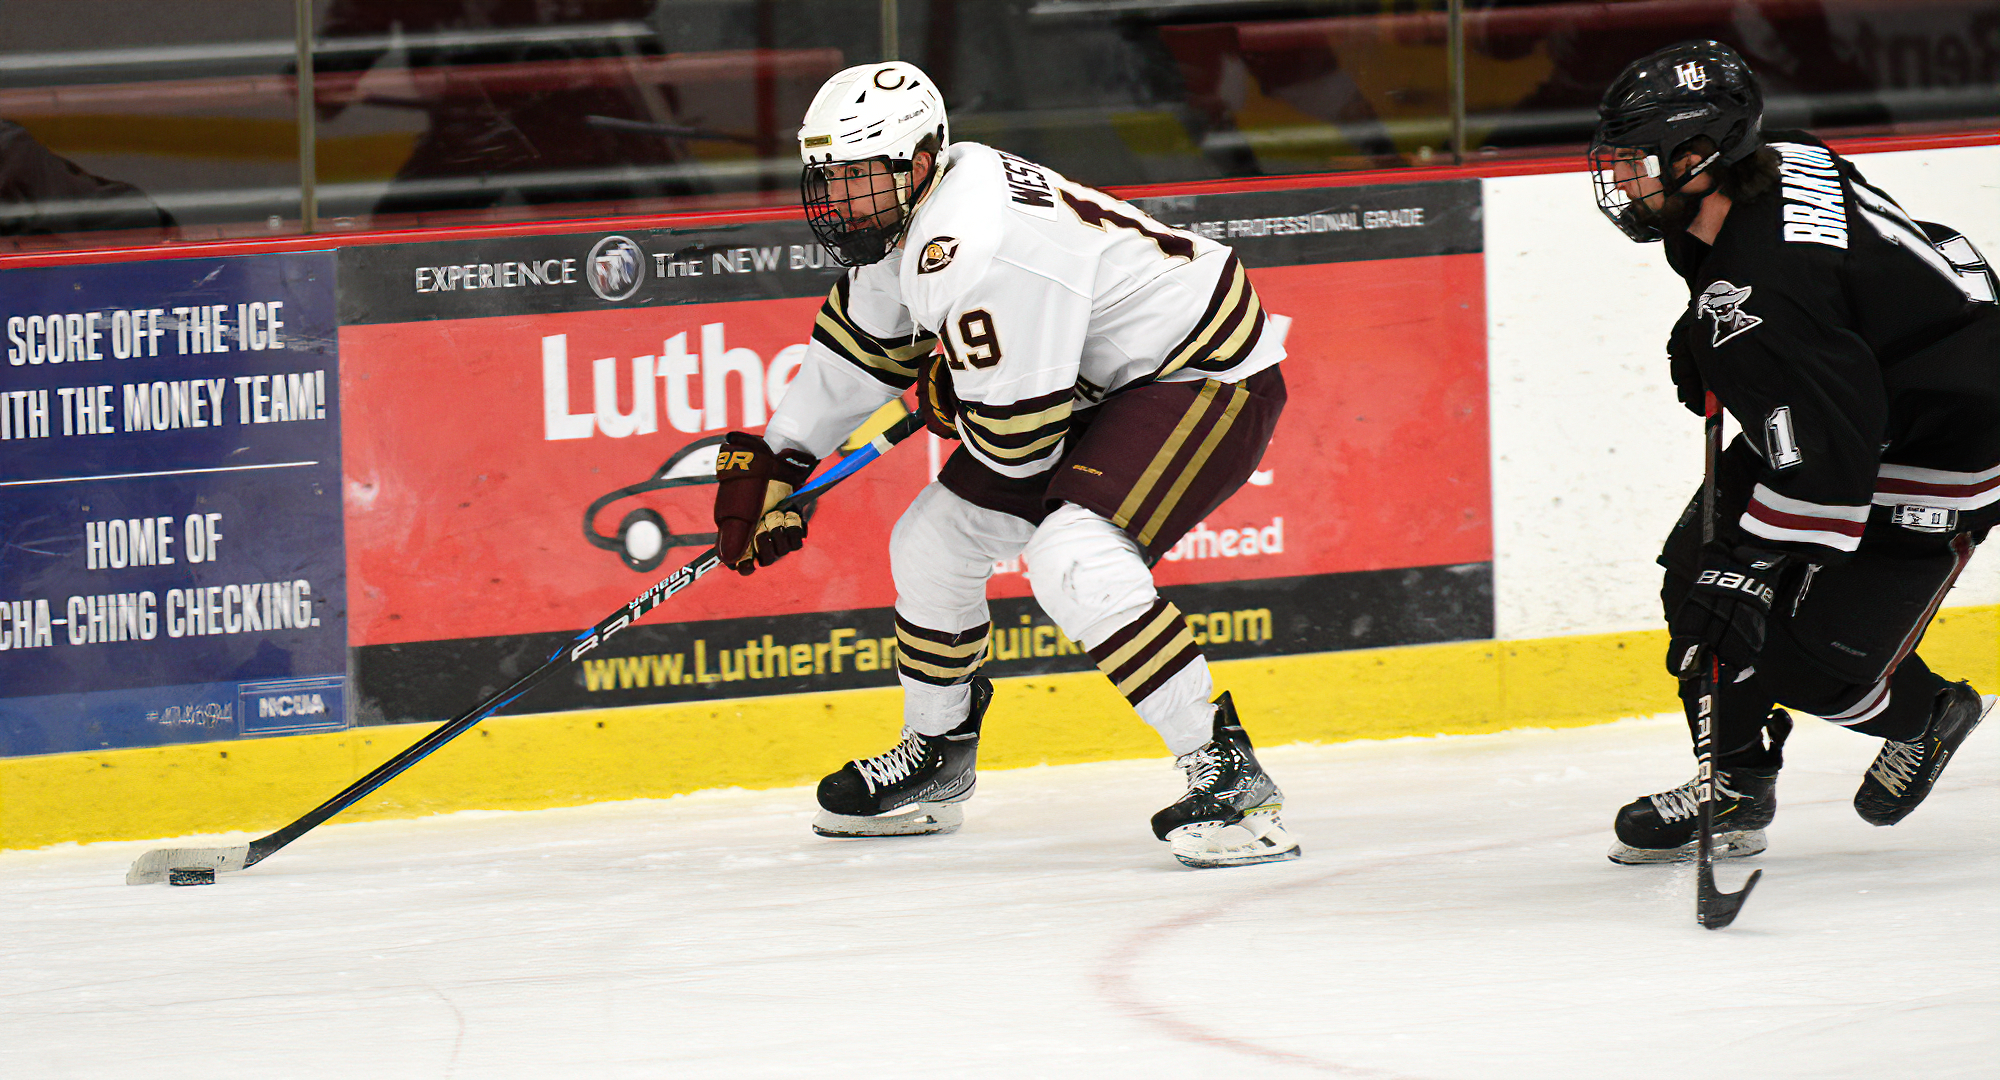 Freshman Jack Westlund scored the Cobbers' second goal in their series finale at St. Scholastica. He also led the team with six shots on goal.